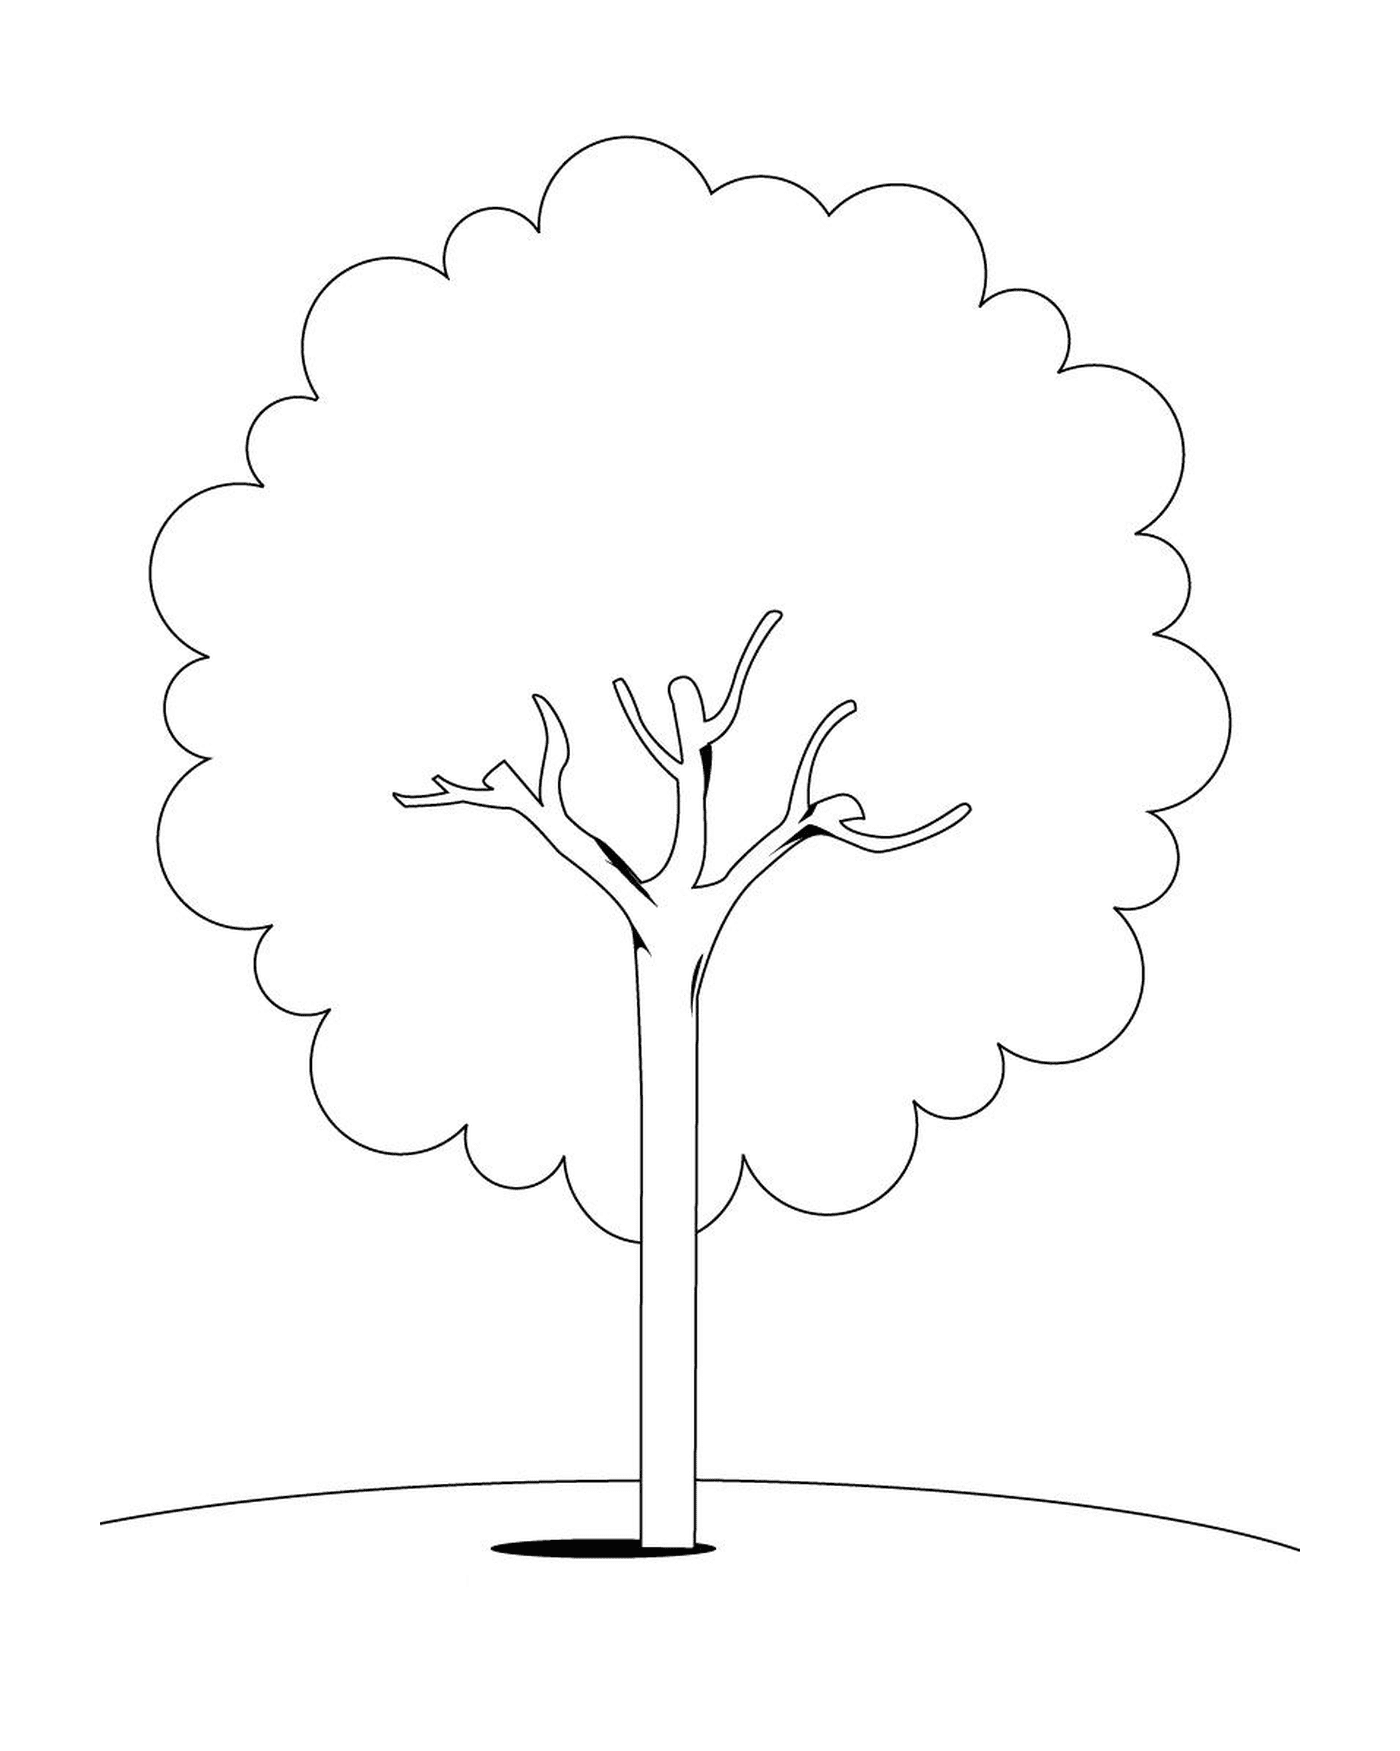  An image of a tree 